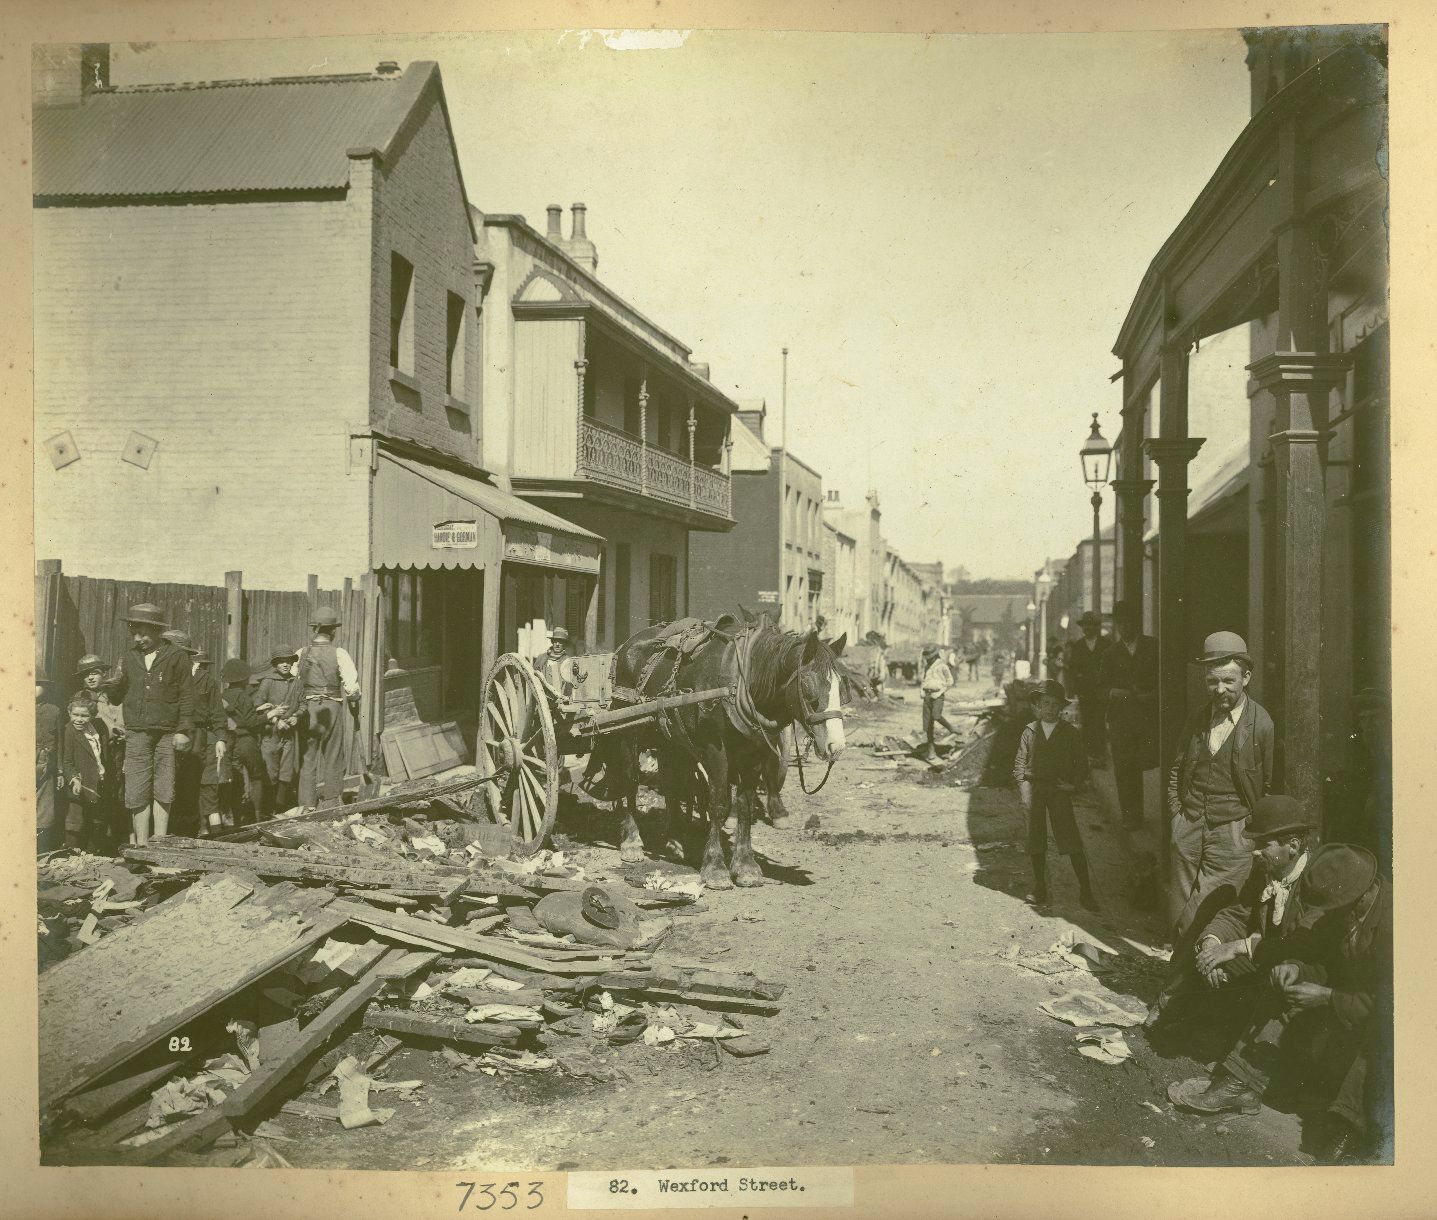 People pose casually along a dirt road. A horse and cart stand behind rubble that is piled on the street 